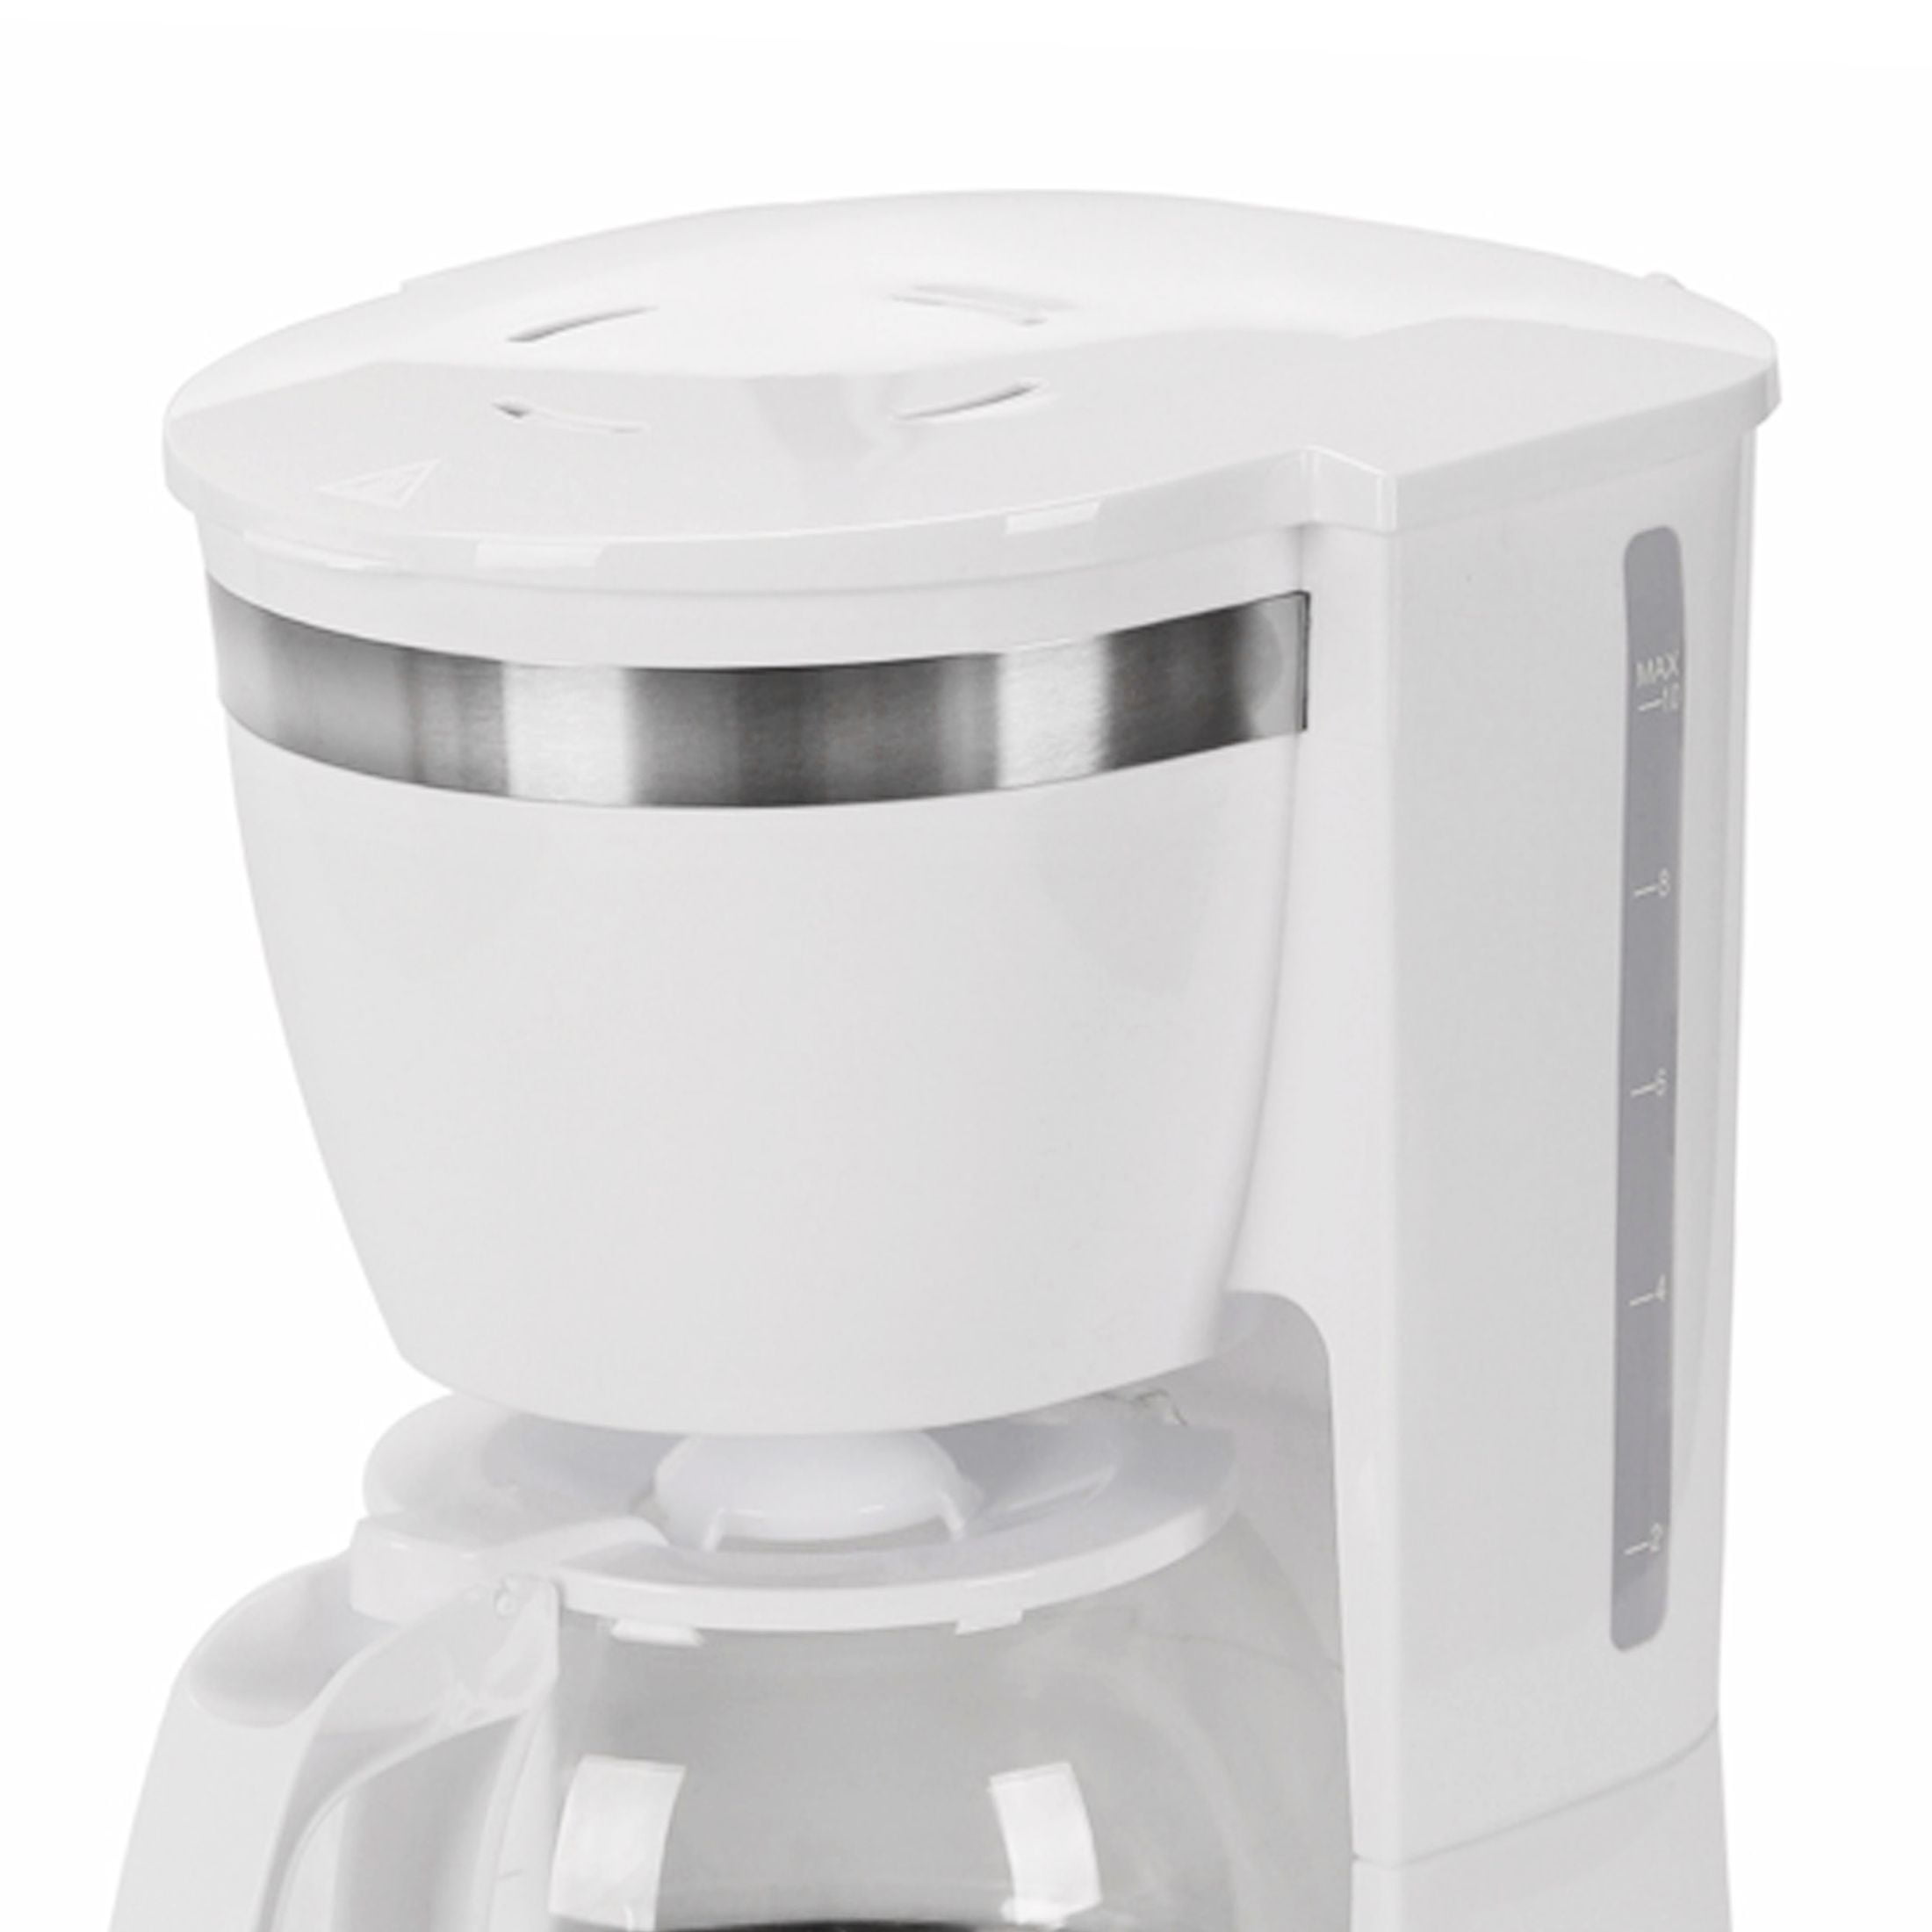 Brentwood TS-213W 4 Cup Coffee Maker, White - Brentwood Appliances